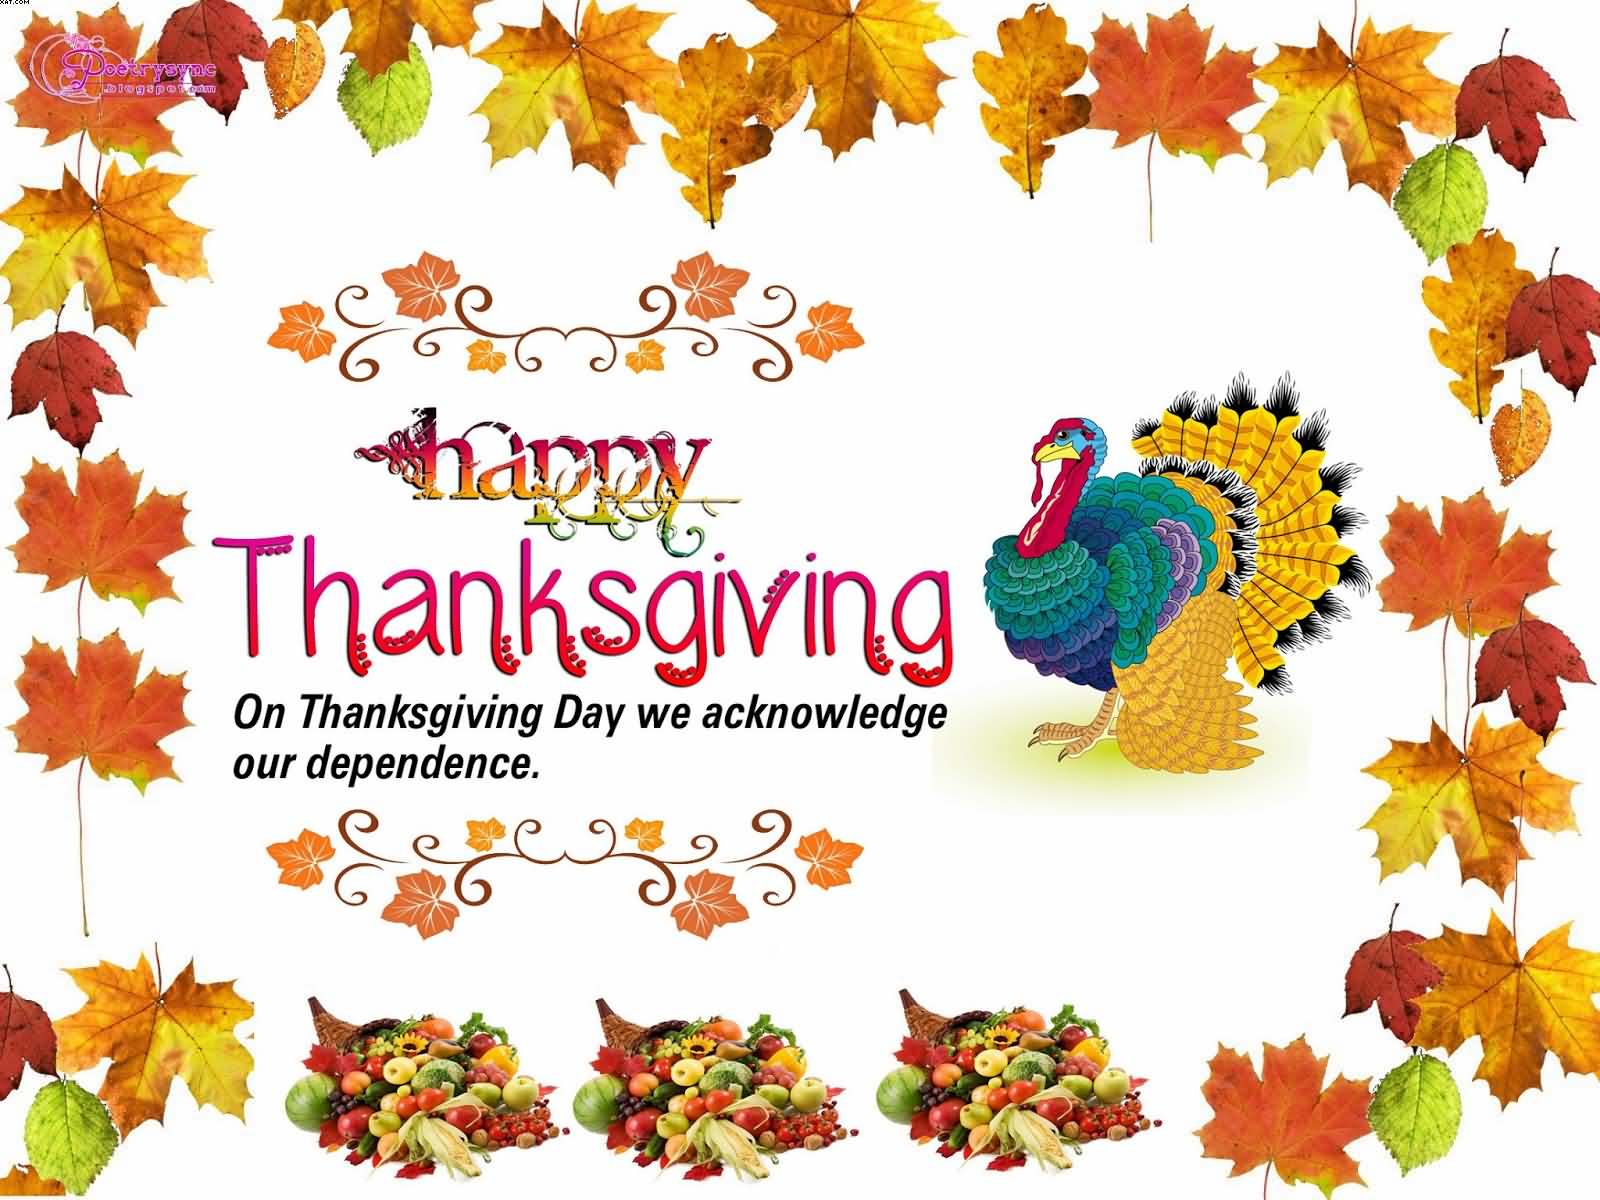 Happy Thanksgiving Day On thanksgiving day we acknowledge our dependence wallpaper